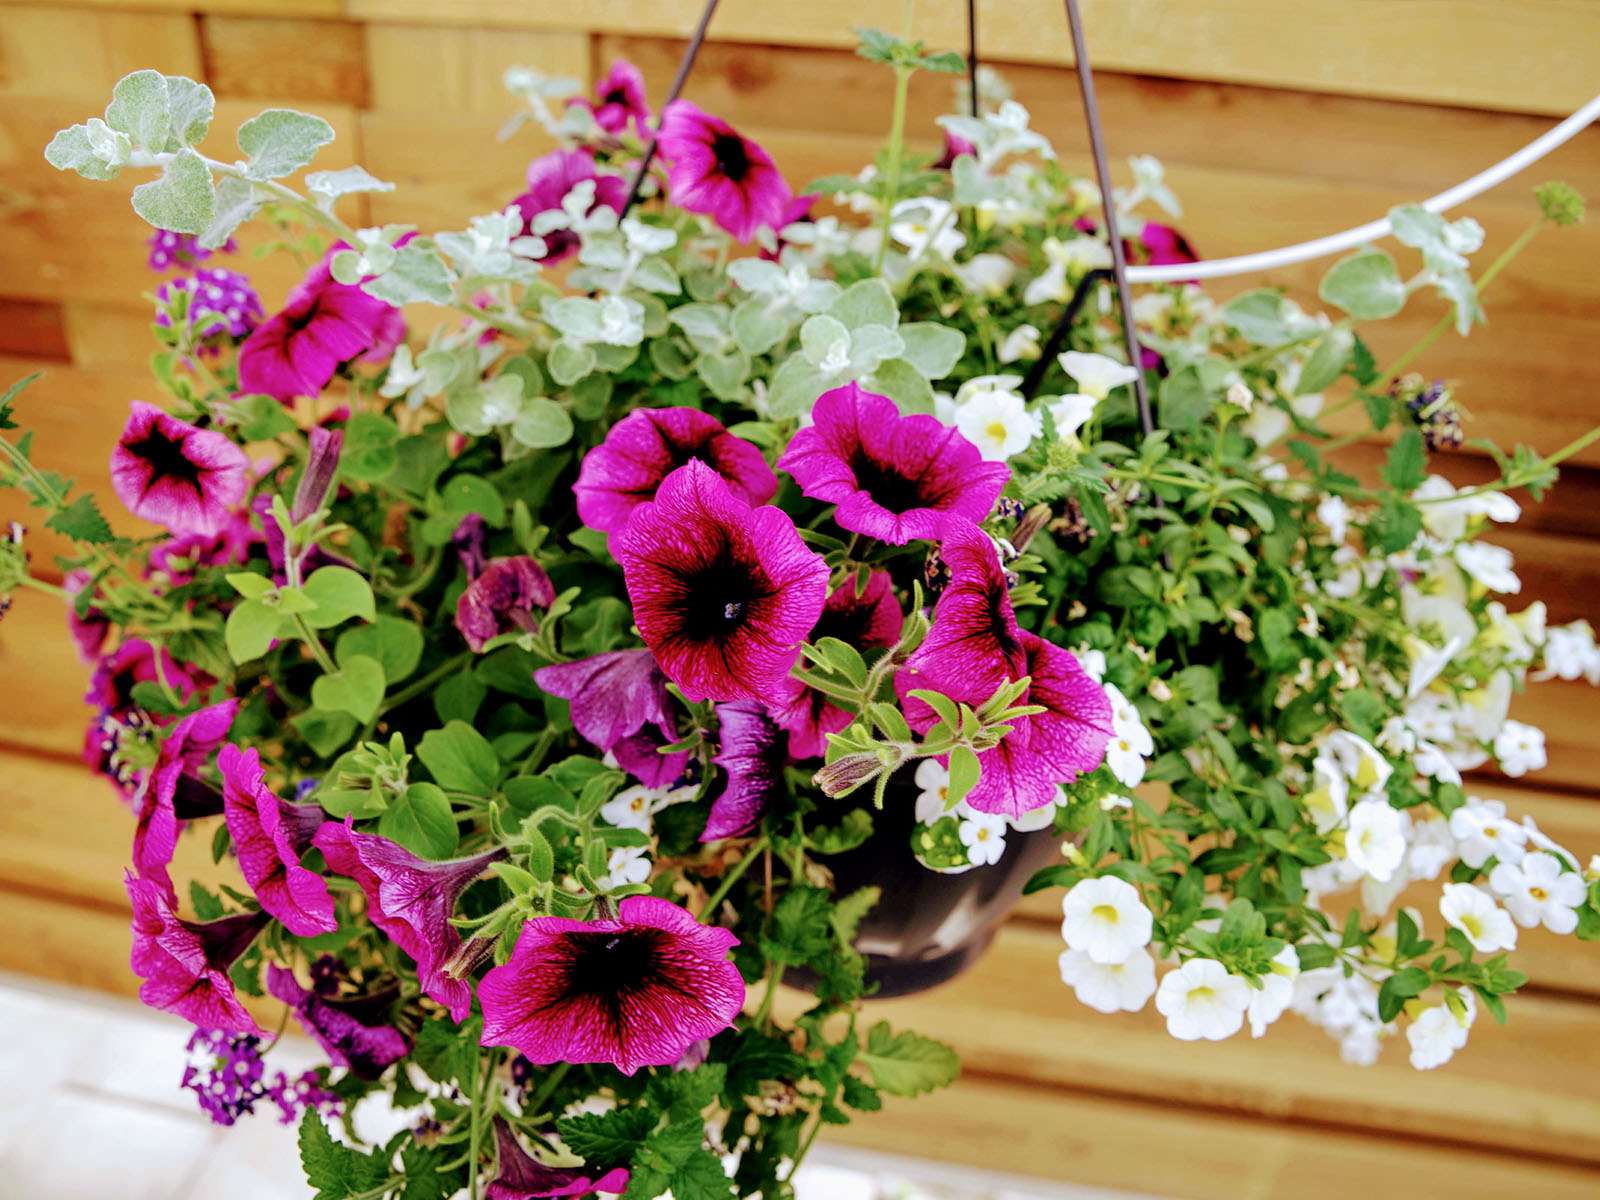 Hanging basket as mothers day gift